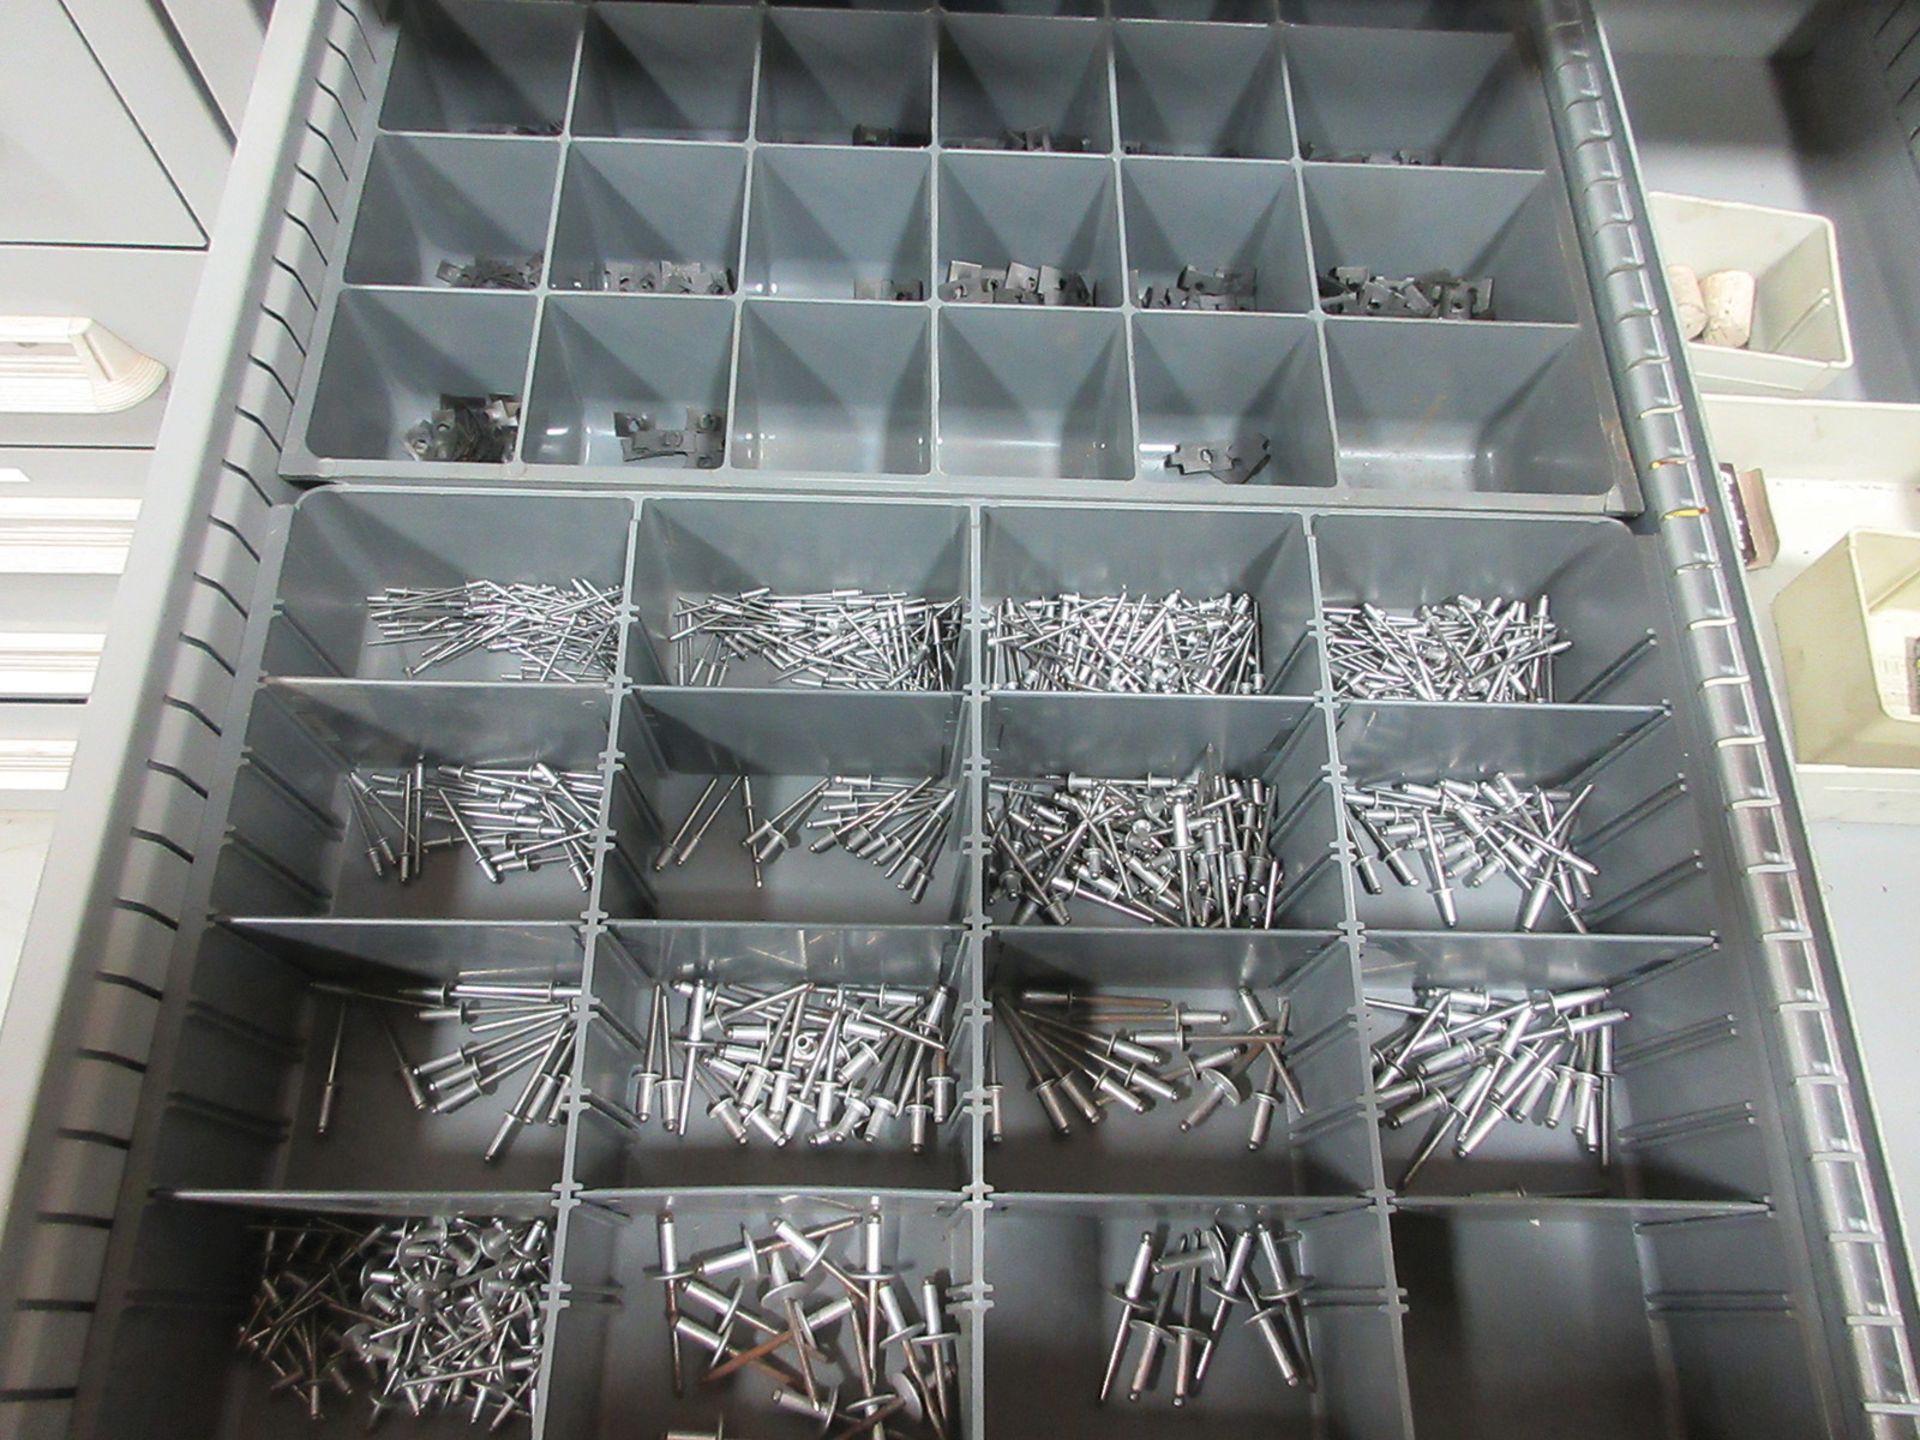 LYON 9-DRAWER CABINET WITH CONTENTS; POP RIVETS, SPRING NUTS, SET SCREWS, NUTS, WASHERS, AND - Image 2 of 4